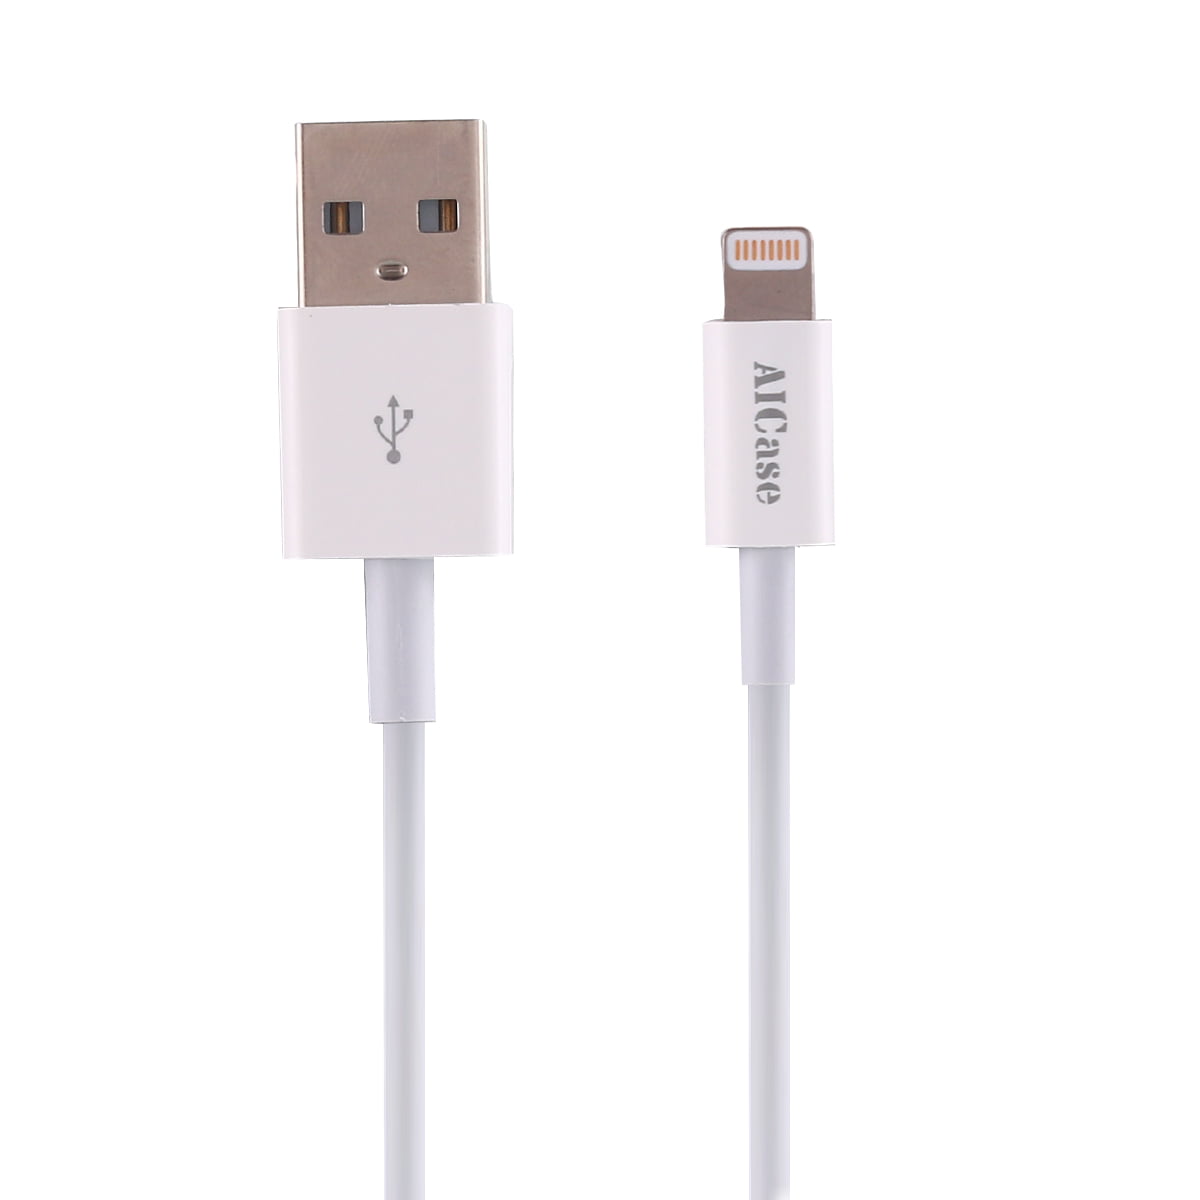 3IN1 2M IPHONE LIGHTNING CHARGEUR CHARGER CHARGING CABLE IPHONE 5 6 7 8 X IPAD 